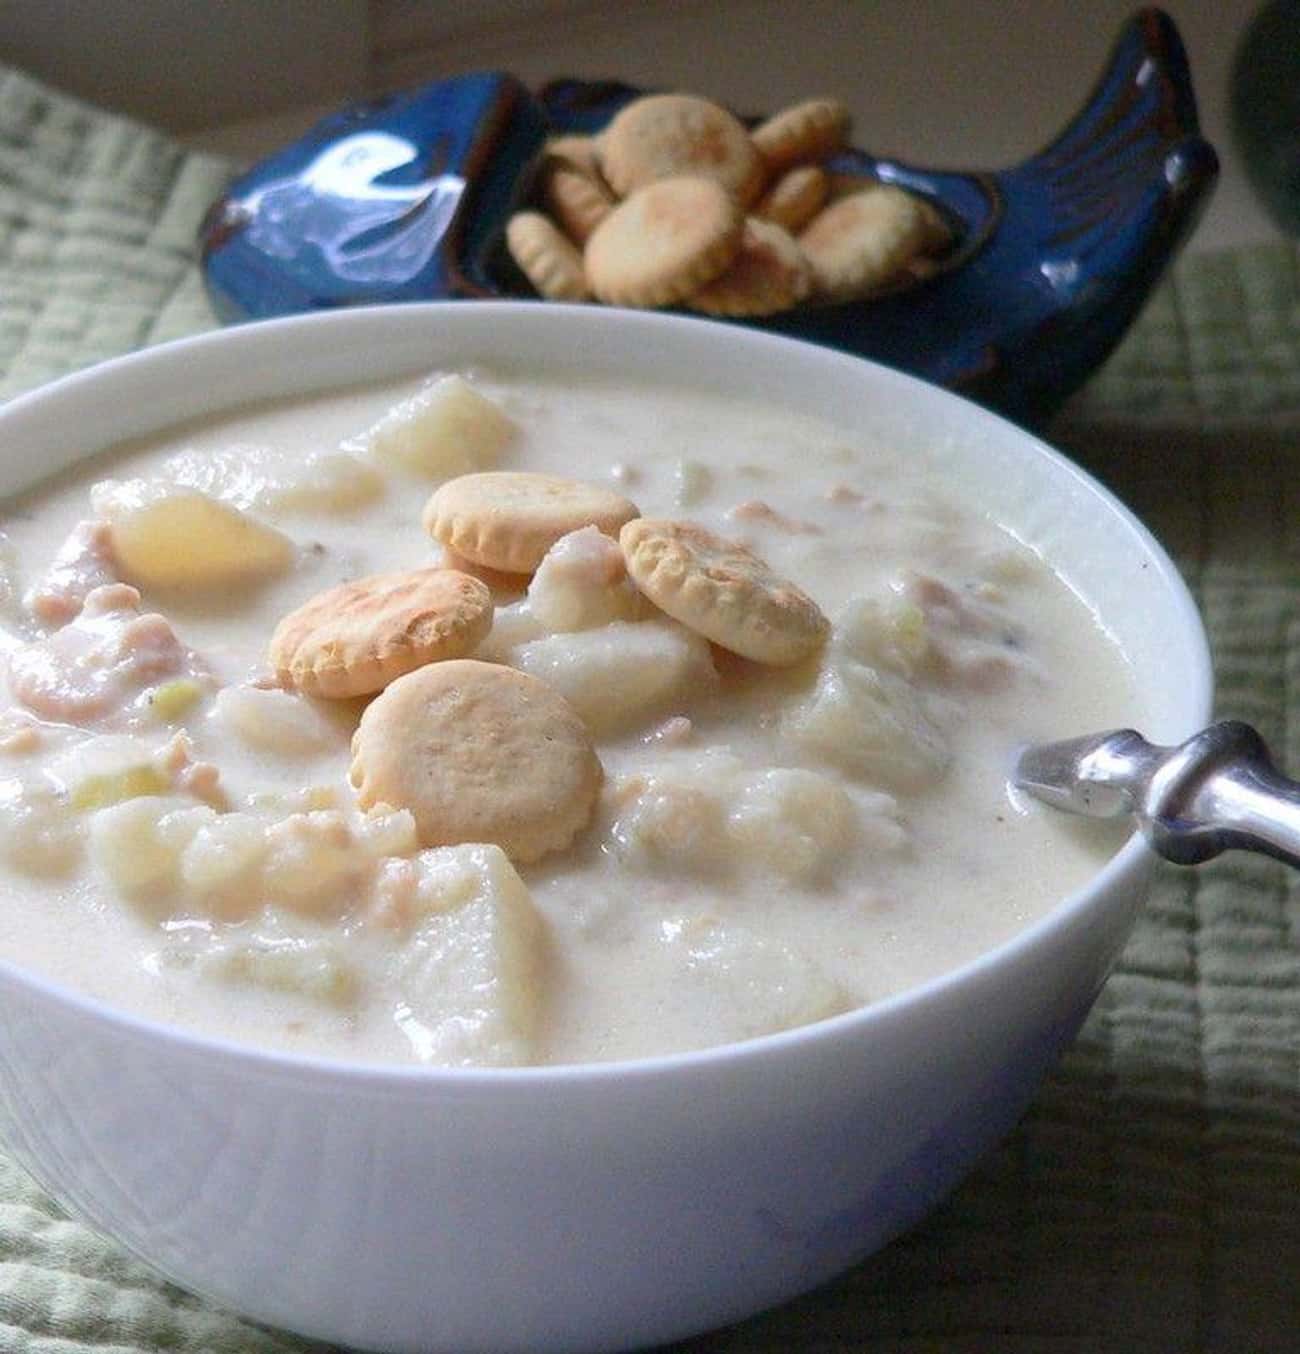 Massachusetts - There's Only One Kind Of Clam Chowder, And It's White